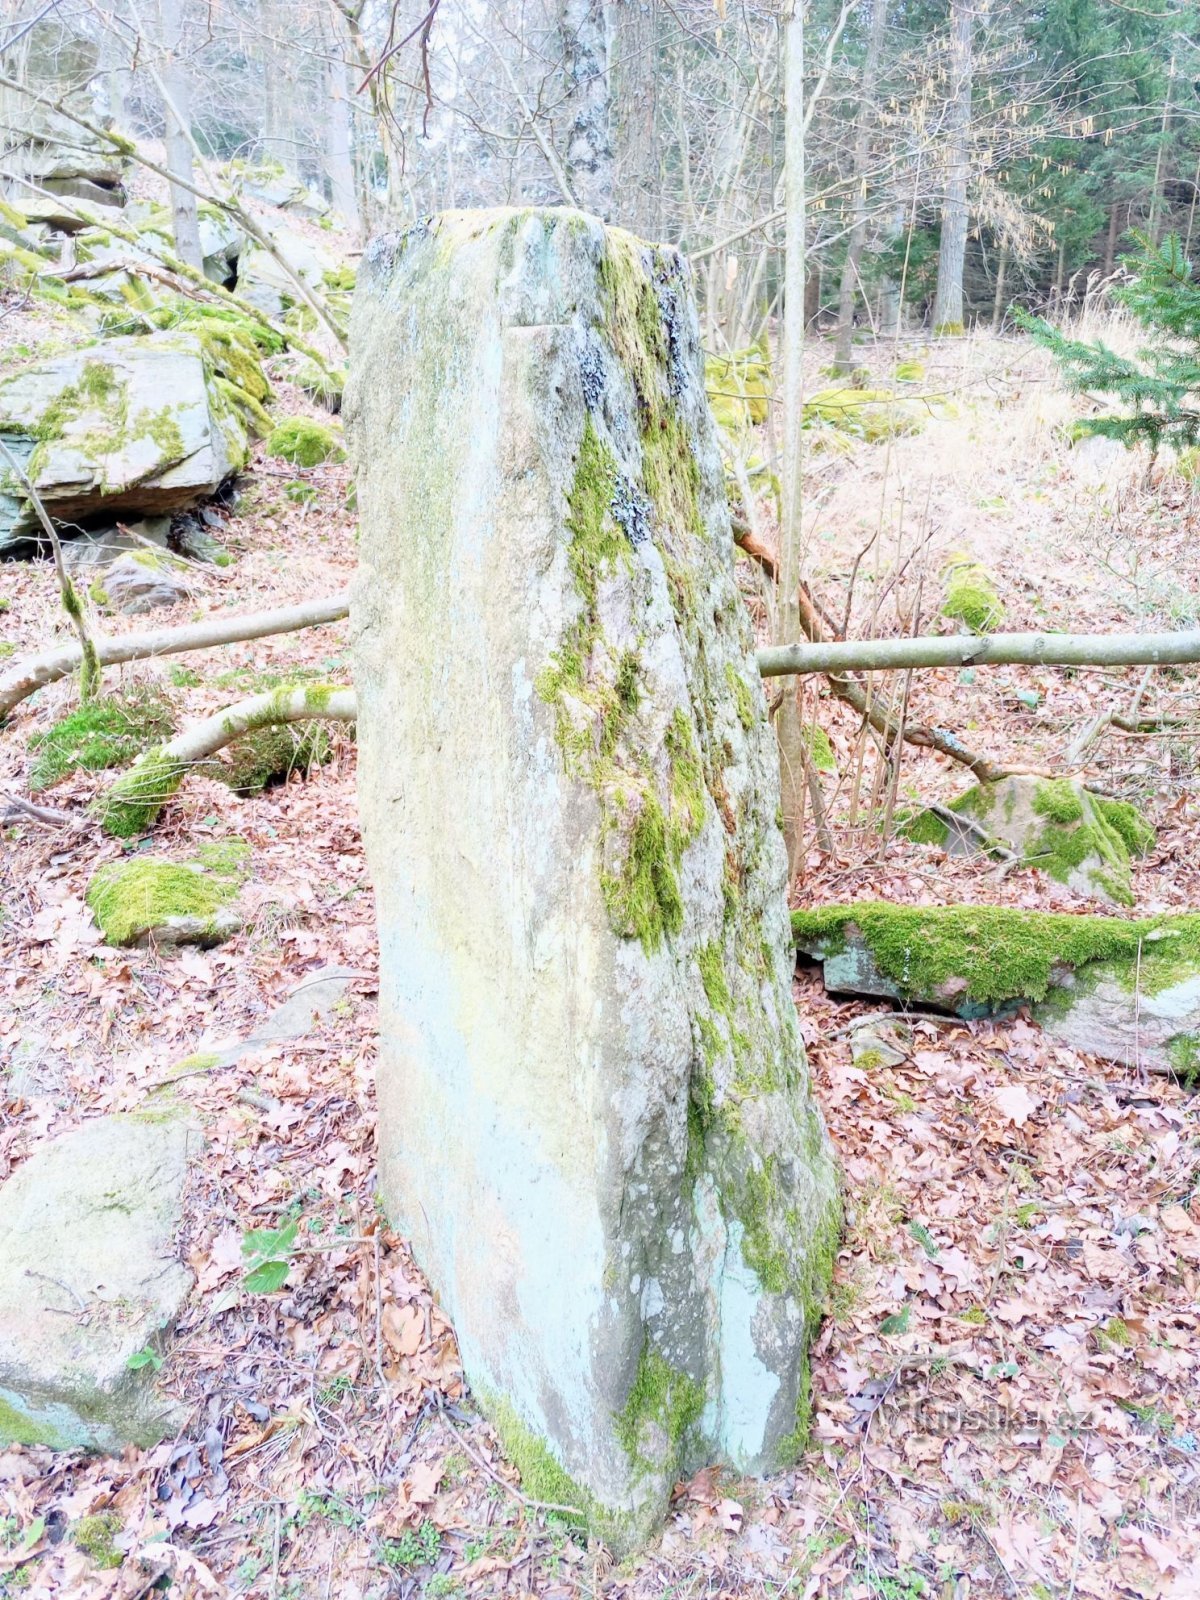 3. Another menhir under a wall full of boulders, LV 3